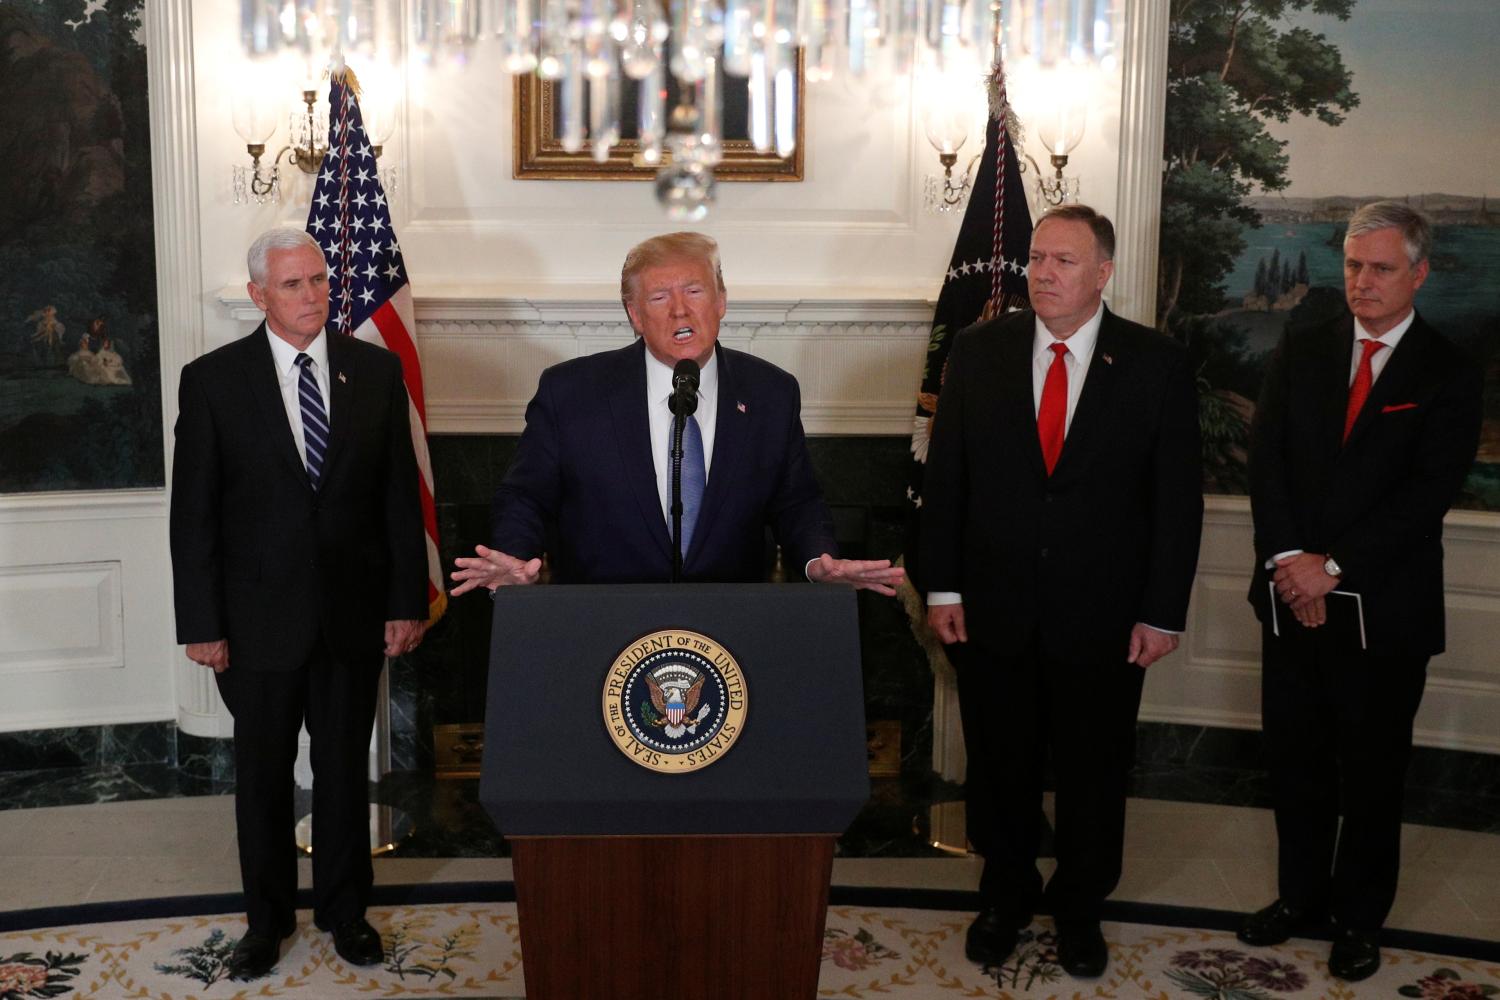 U.S. President Donald Trump delivers a statement on the conflict in Syria as Vice President Mike Pence, Secretary of State Mike Pompeo and White House National Security Advisor Robert OBrien stand by in the Diplomatic Room of the White House in Washington, U.S., October 23, 2019. REUTERS/Tom Brenner - RC1CA1D434F0